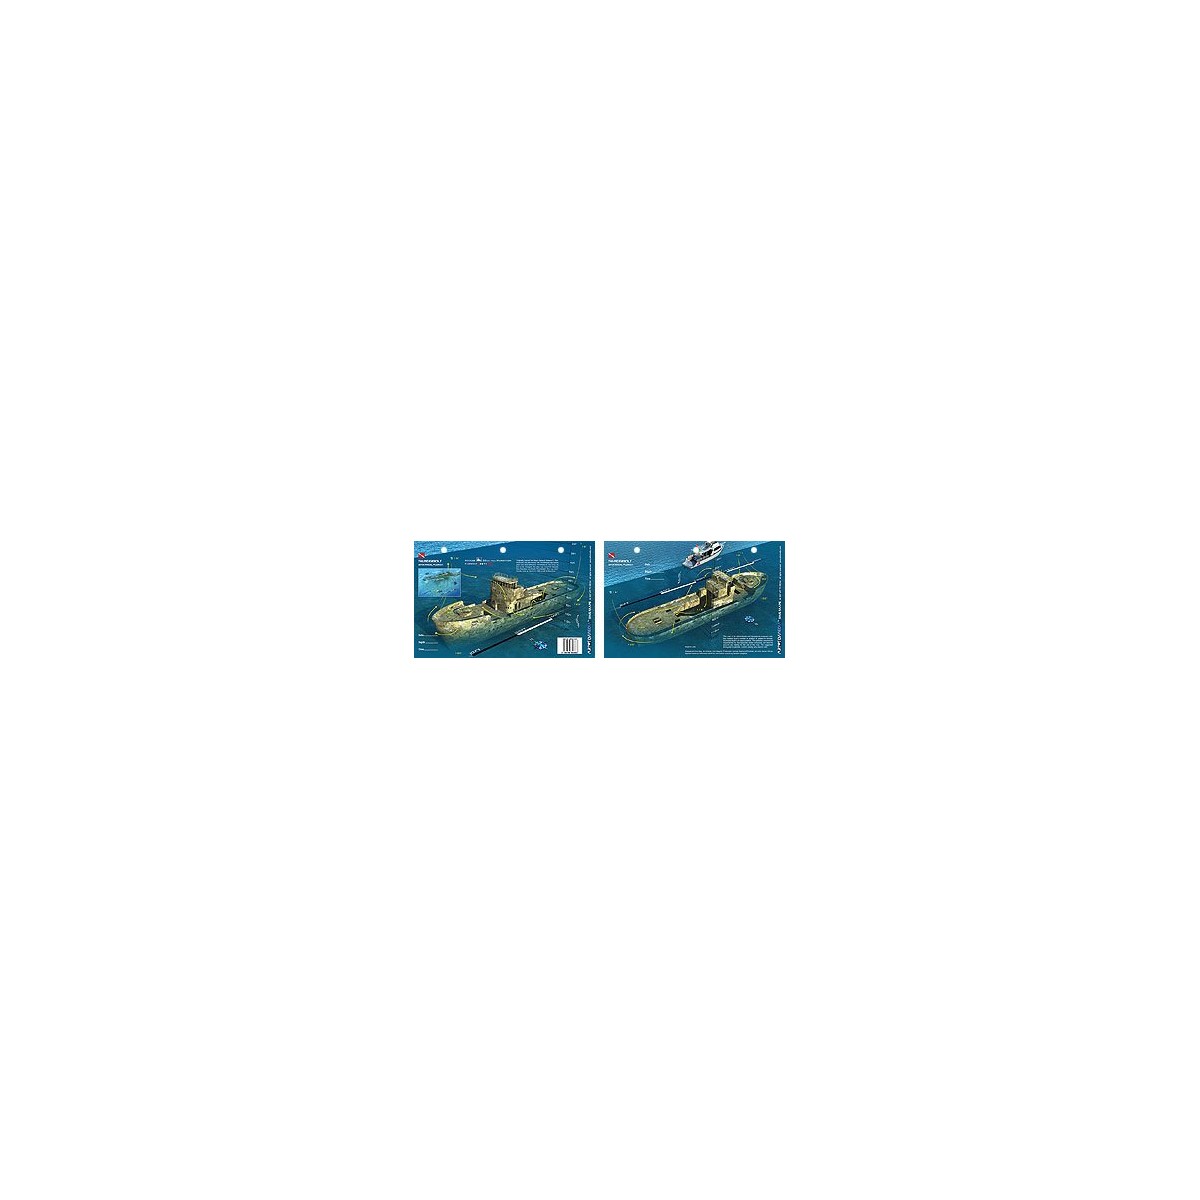 Thunderbolt in Marathon Key, Florida (8.5 x 5.5 Inches) (21.6 x 15cm) - New Art to Media Underwater Waterproof 3D Dive Site Map